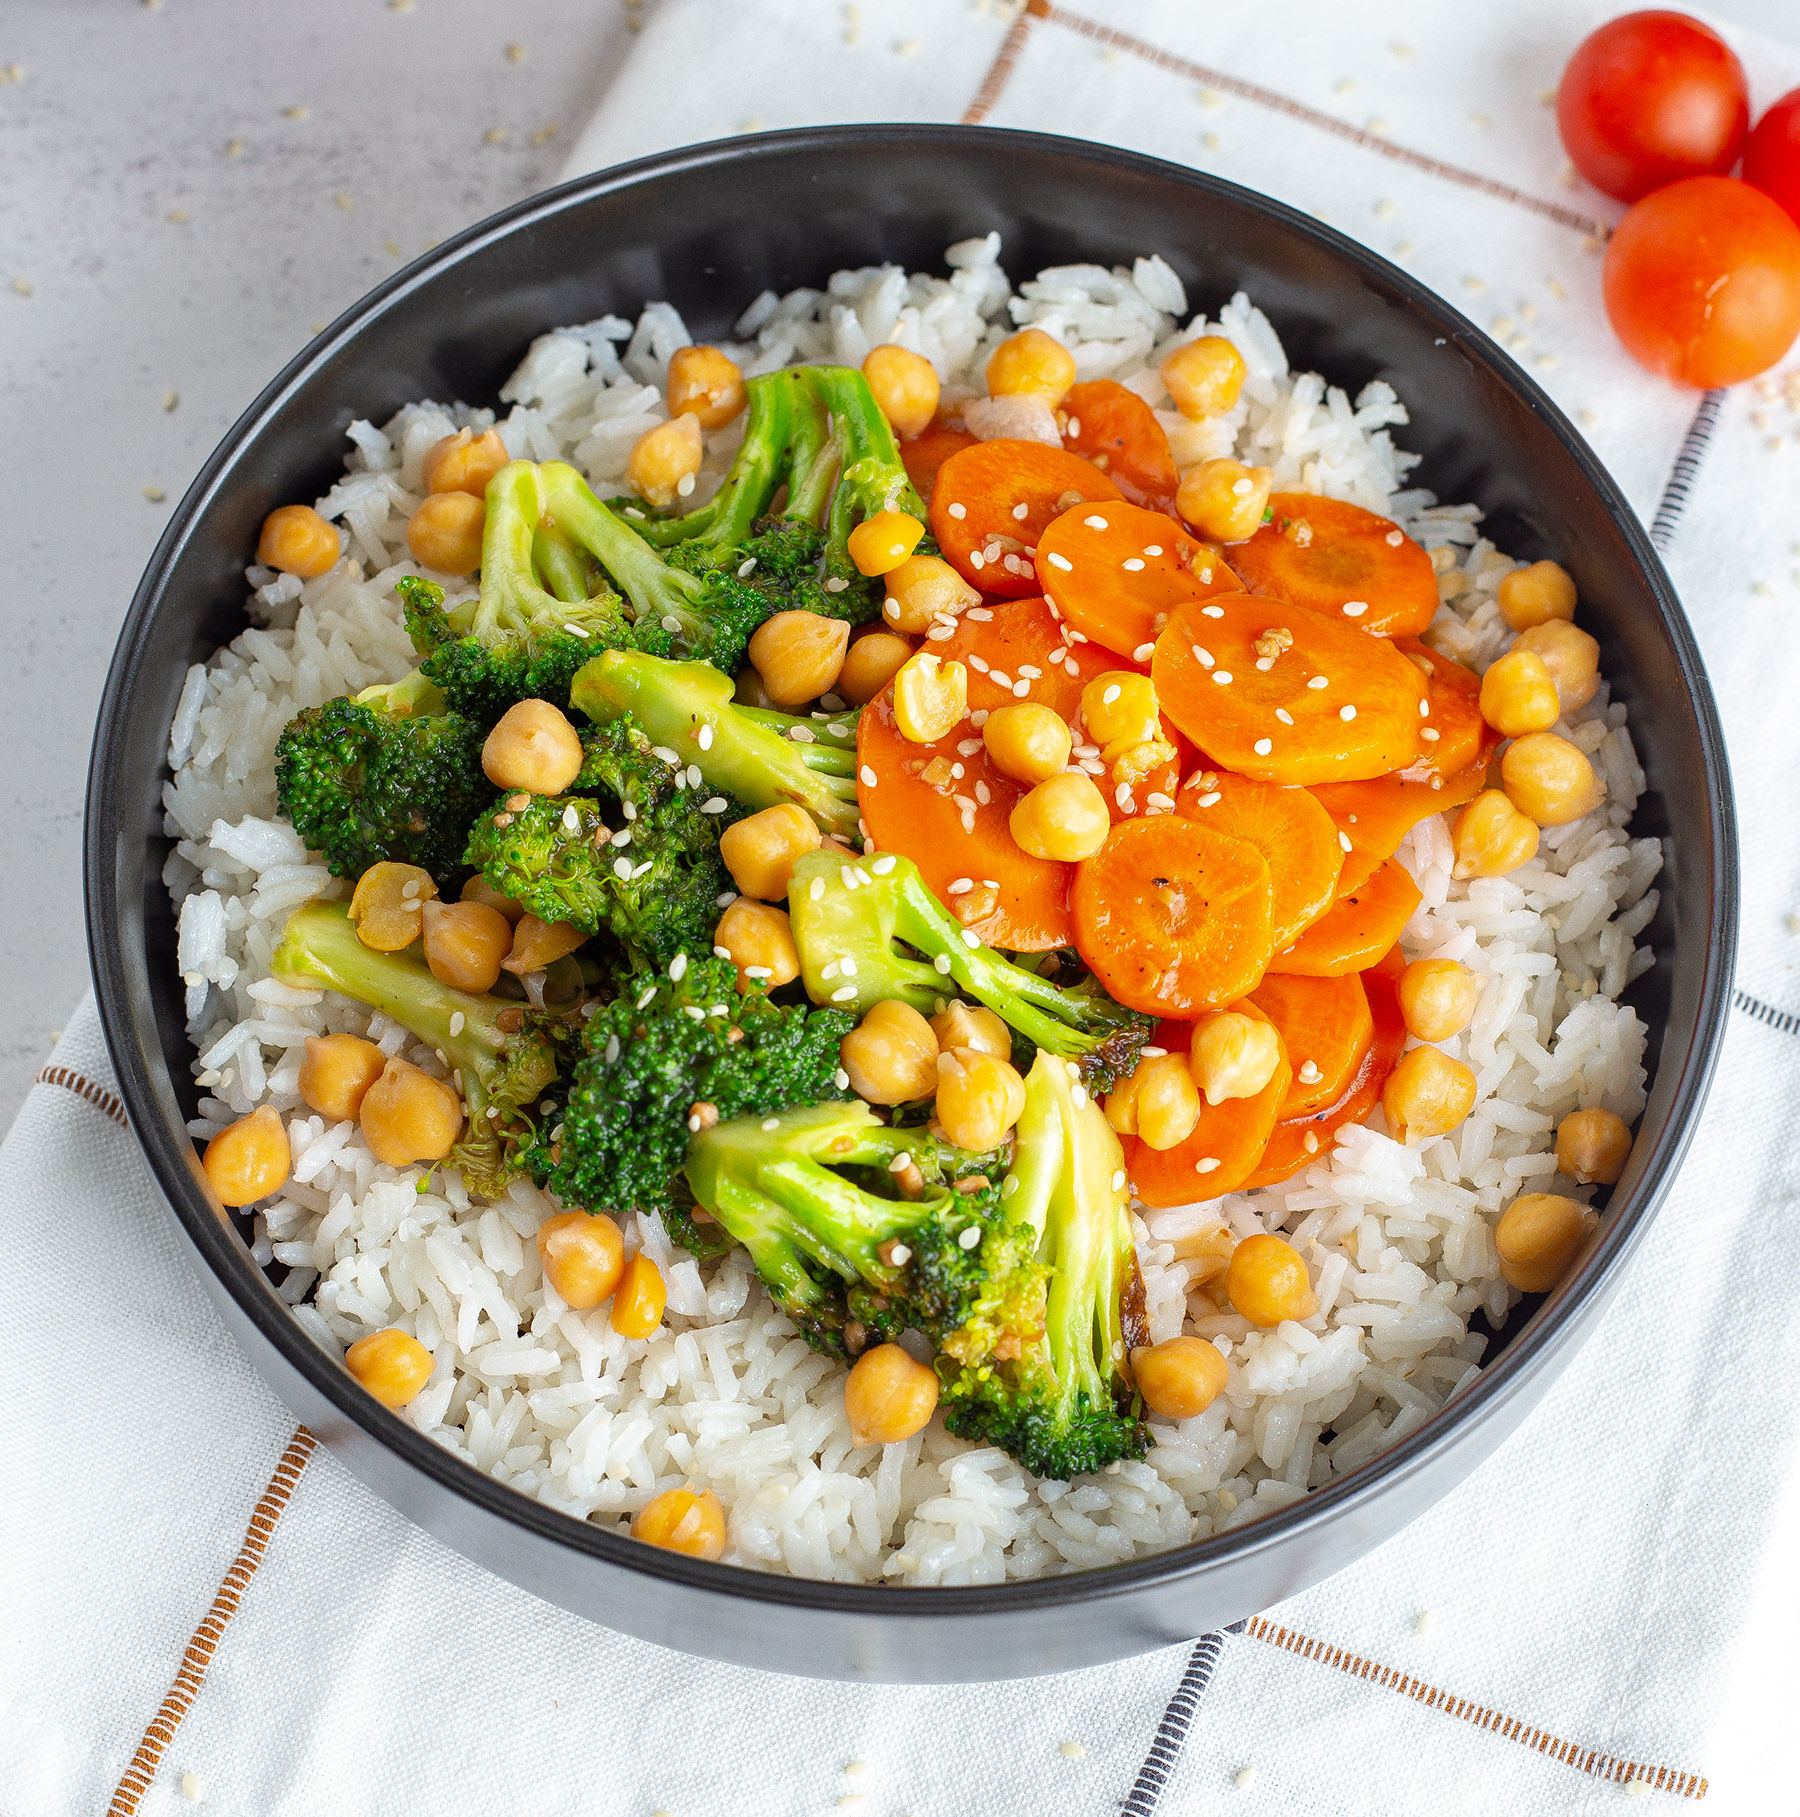 Chickpea Broccoli Stir Fry Plant Based Meal Delivery 1838